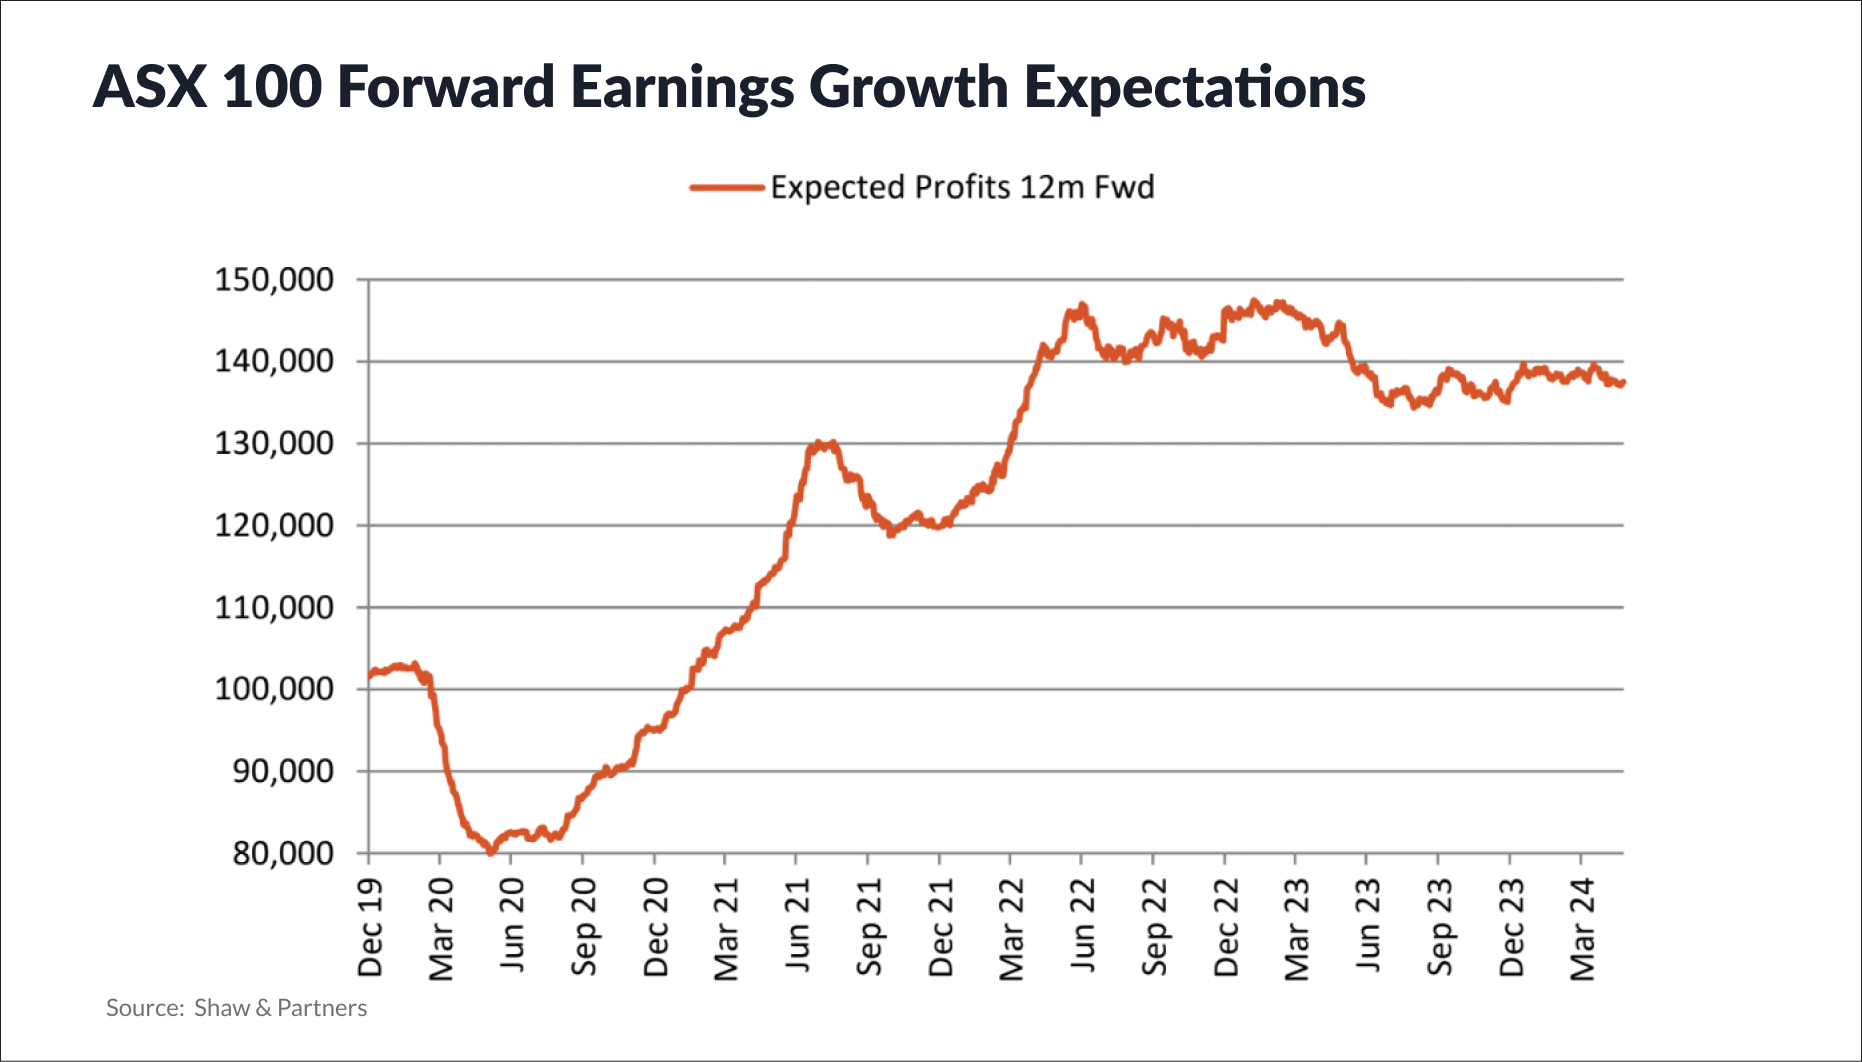 ASX 100 Forward Earnings Growth Expectations (Source: Shaw and Partners)